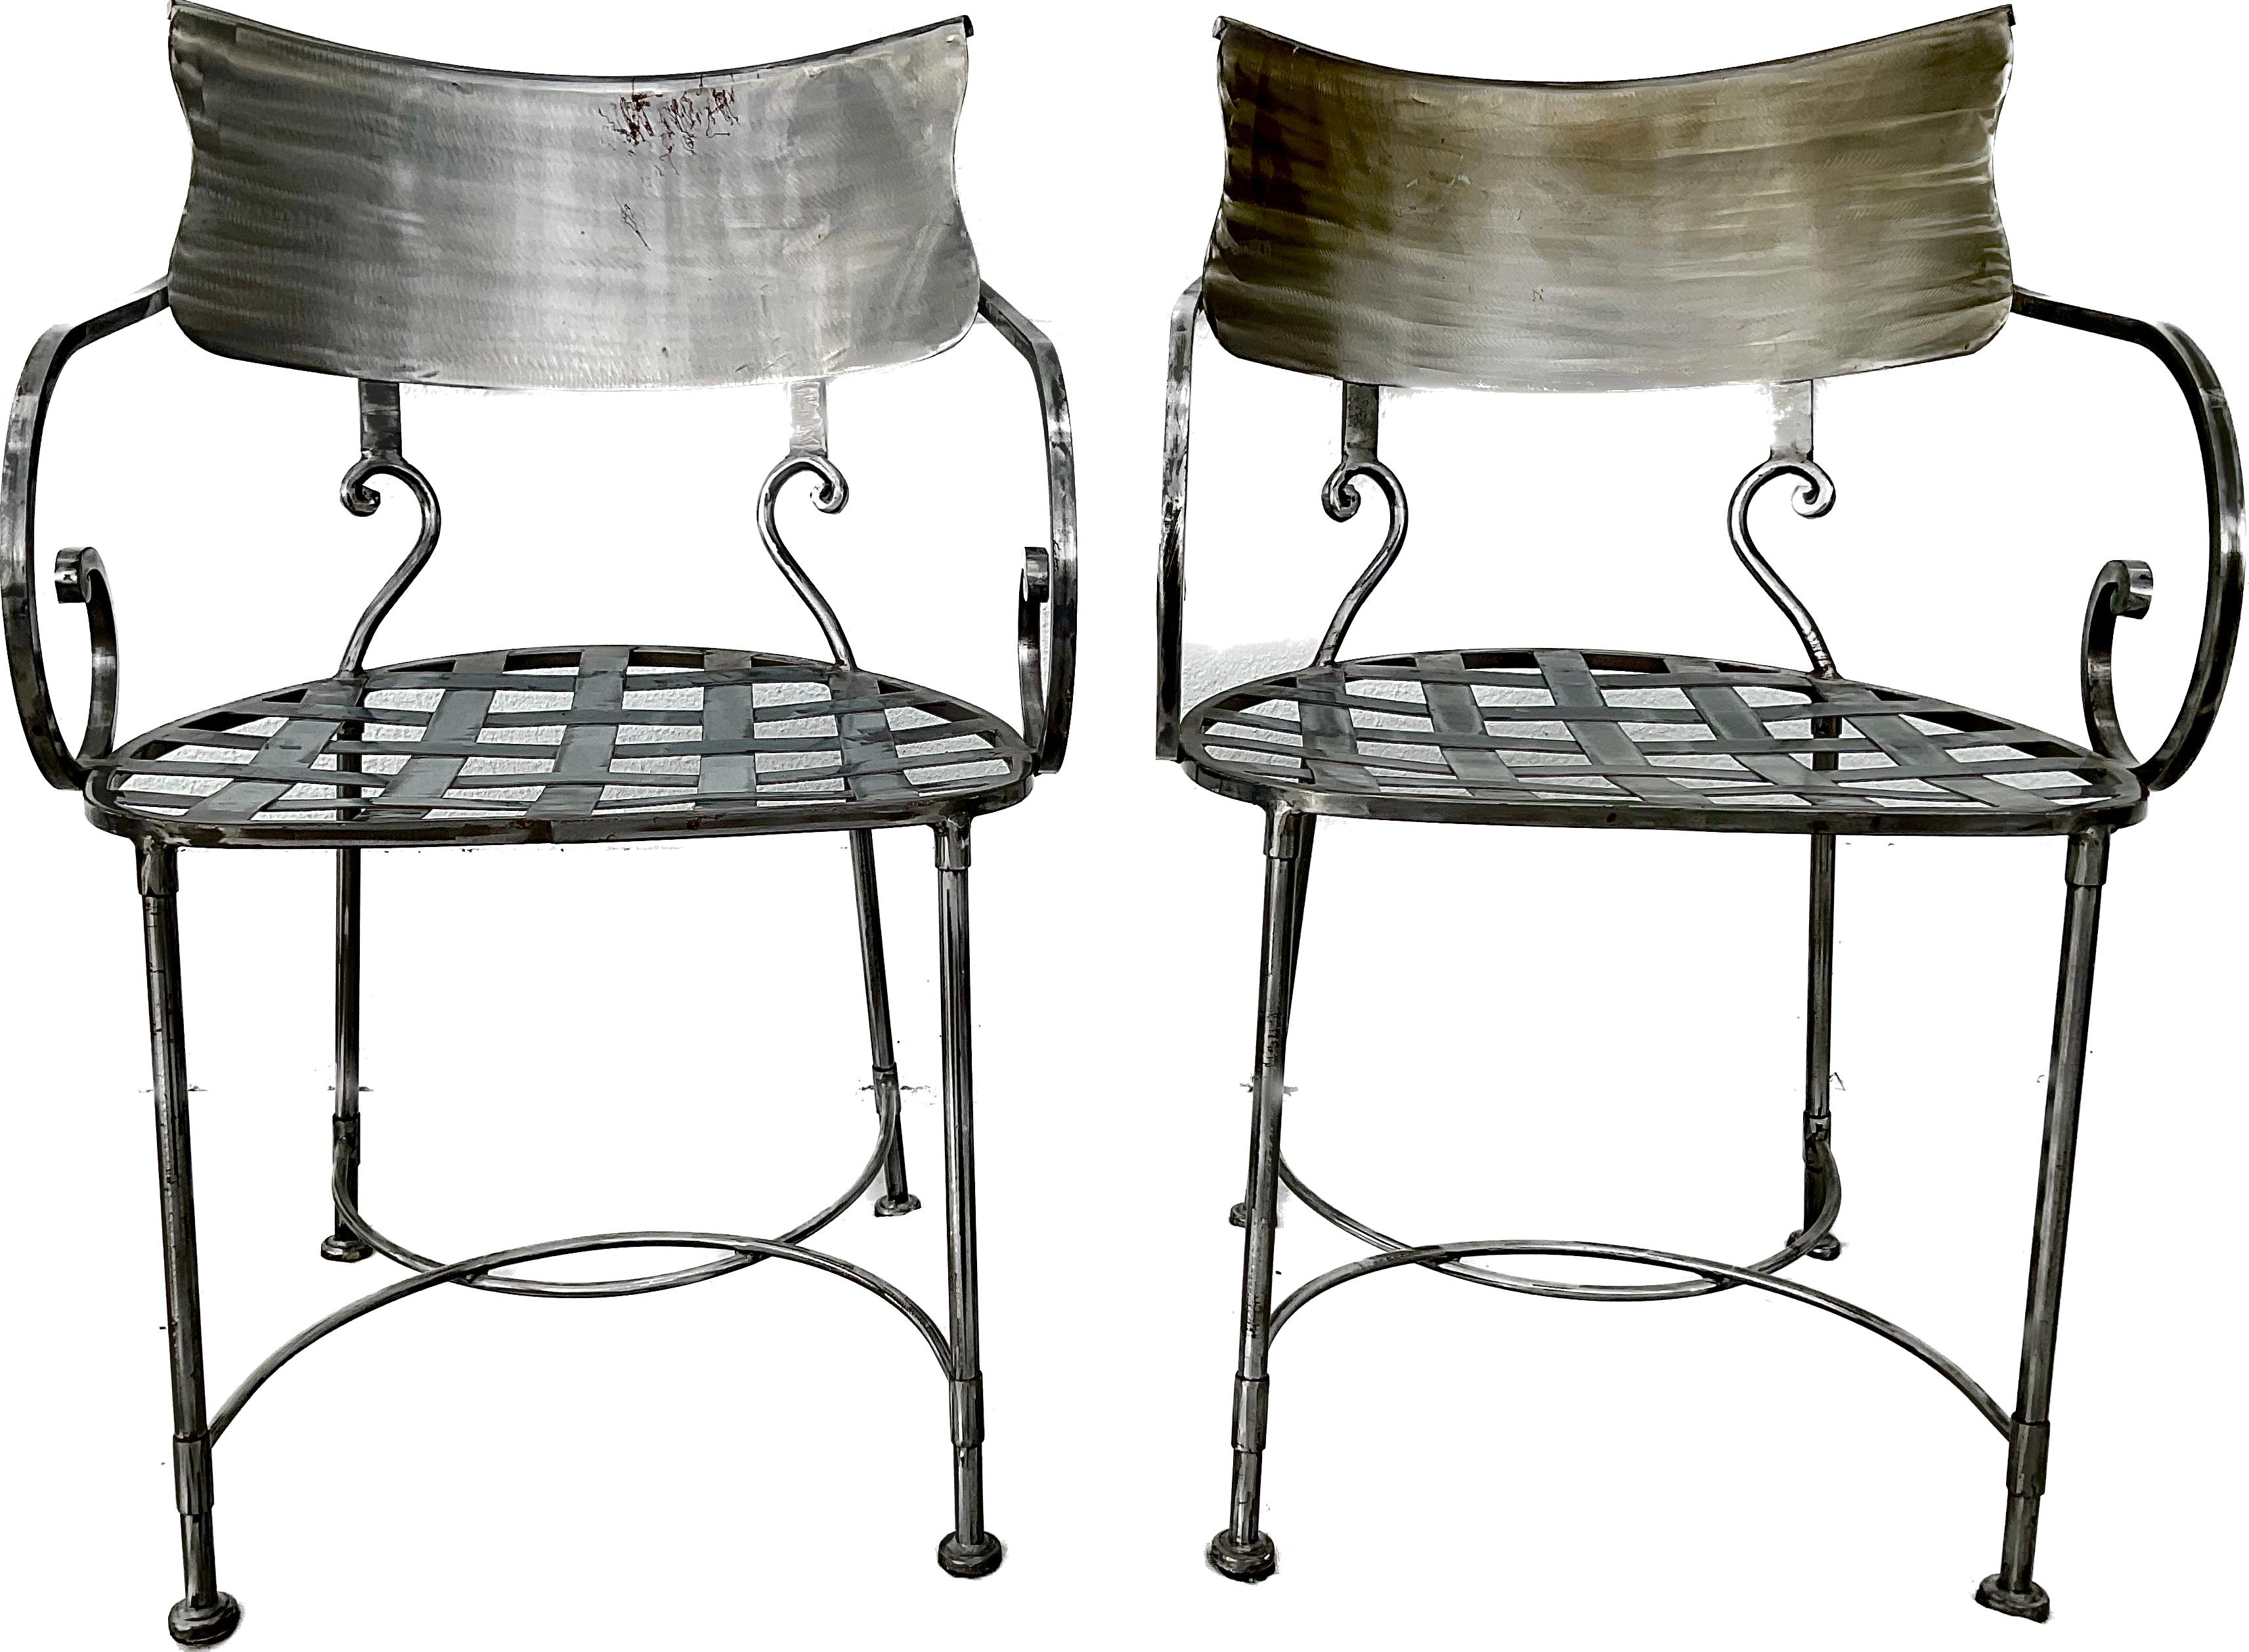 Set of six wonderful Italian hand wrought brushed steel armchairs. Each chair has a matte silver patina with elegant curved backs and arms. Wrought steel continues into a  uniquely woven pattern on the backs and seats of each chair. Inside of seats